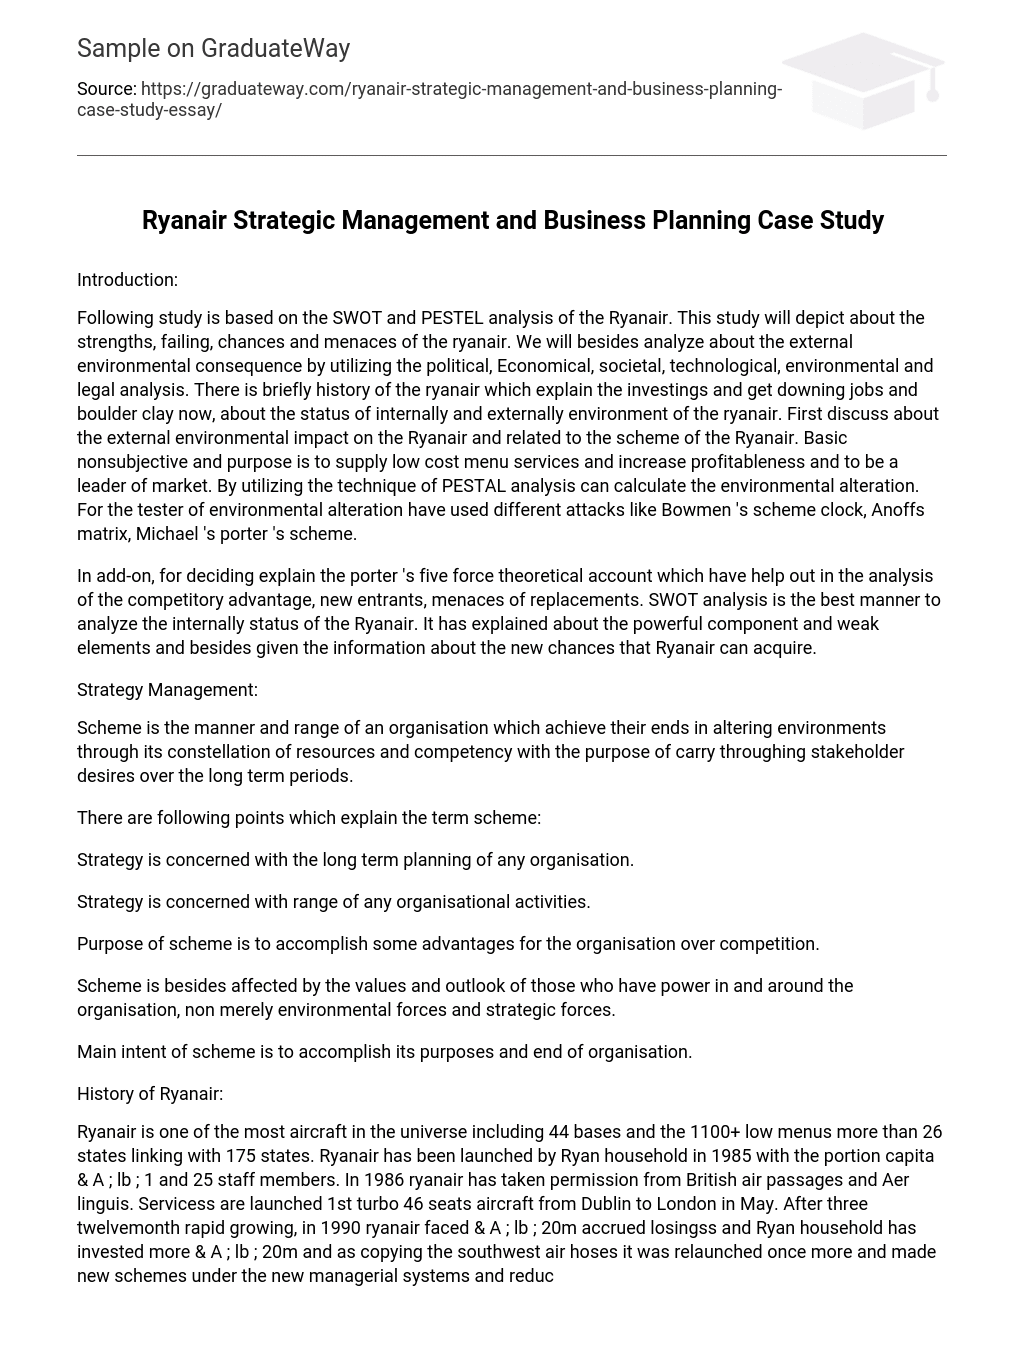 Ryanair Strategic Management and Business Planning Case Study